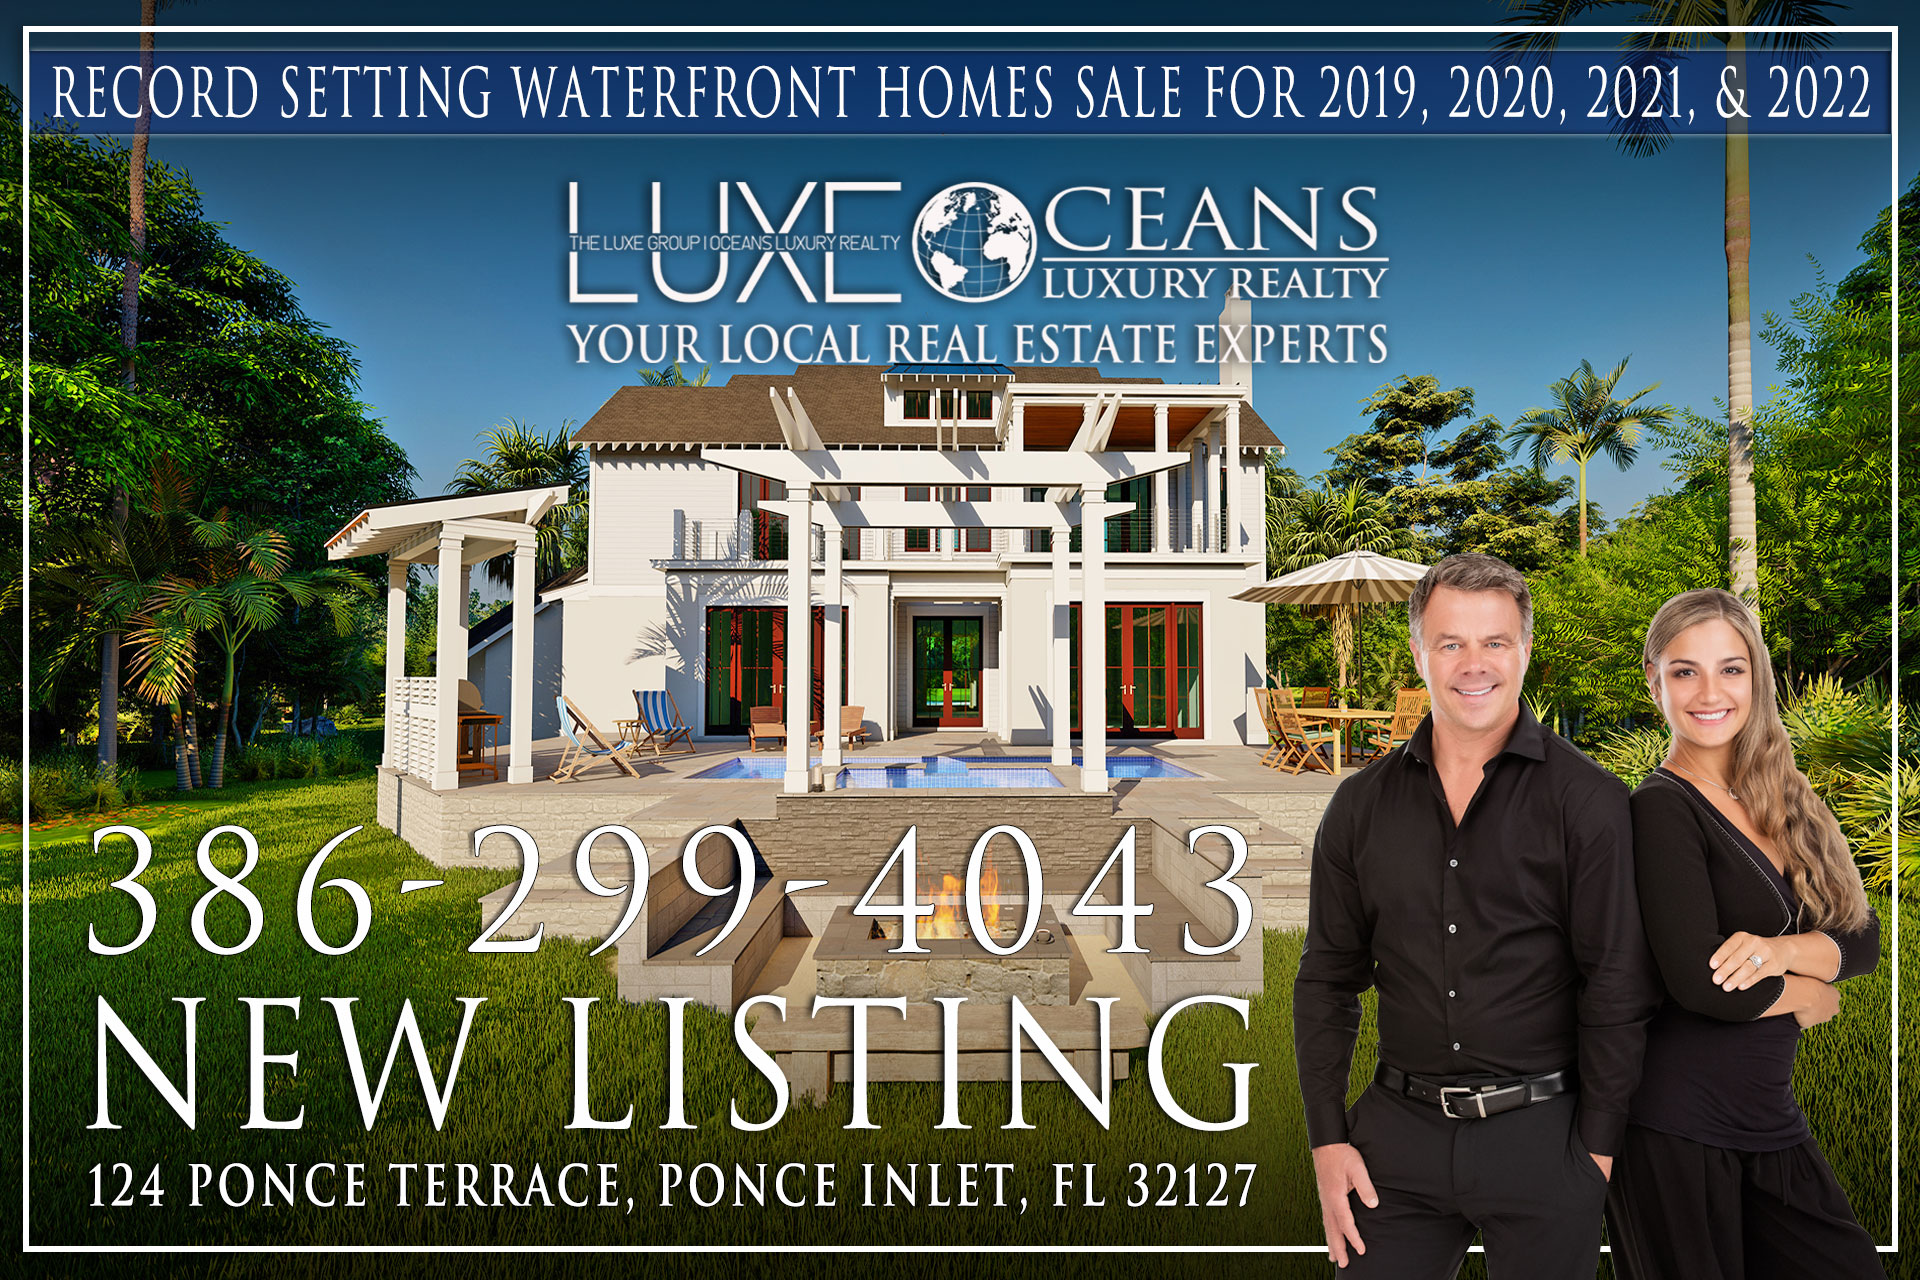 124 Ponce Terrace Circle, Ponce Inlet, FL. New construction home site for sale in Florida. The LUXE Group at Oceans Luxury Realty 386-299-4043